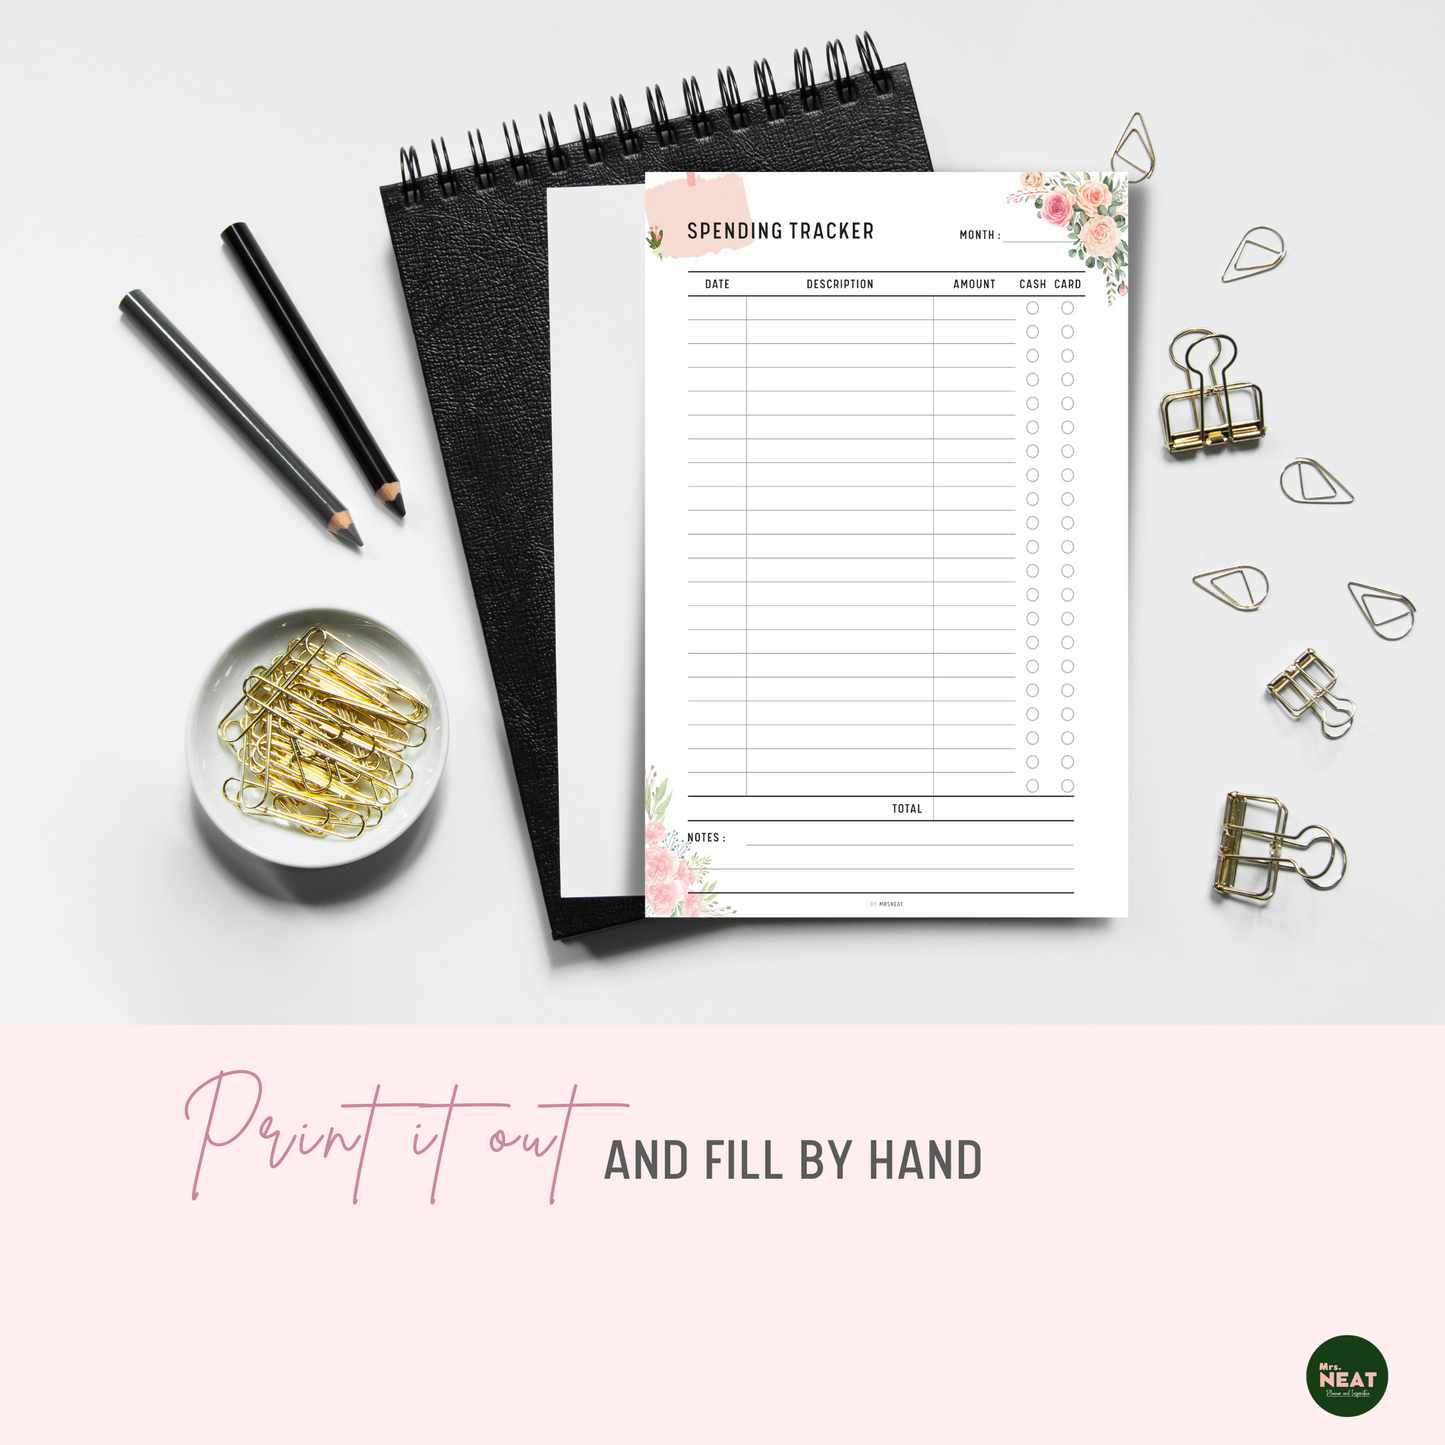 Floral Spending Tracker Printable Planner printed out on paper and put on the black book